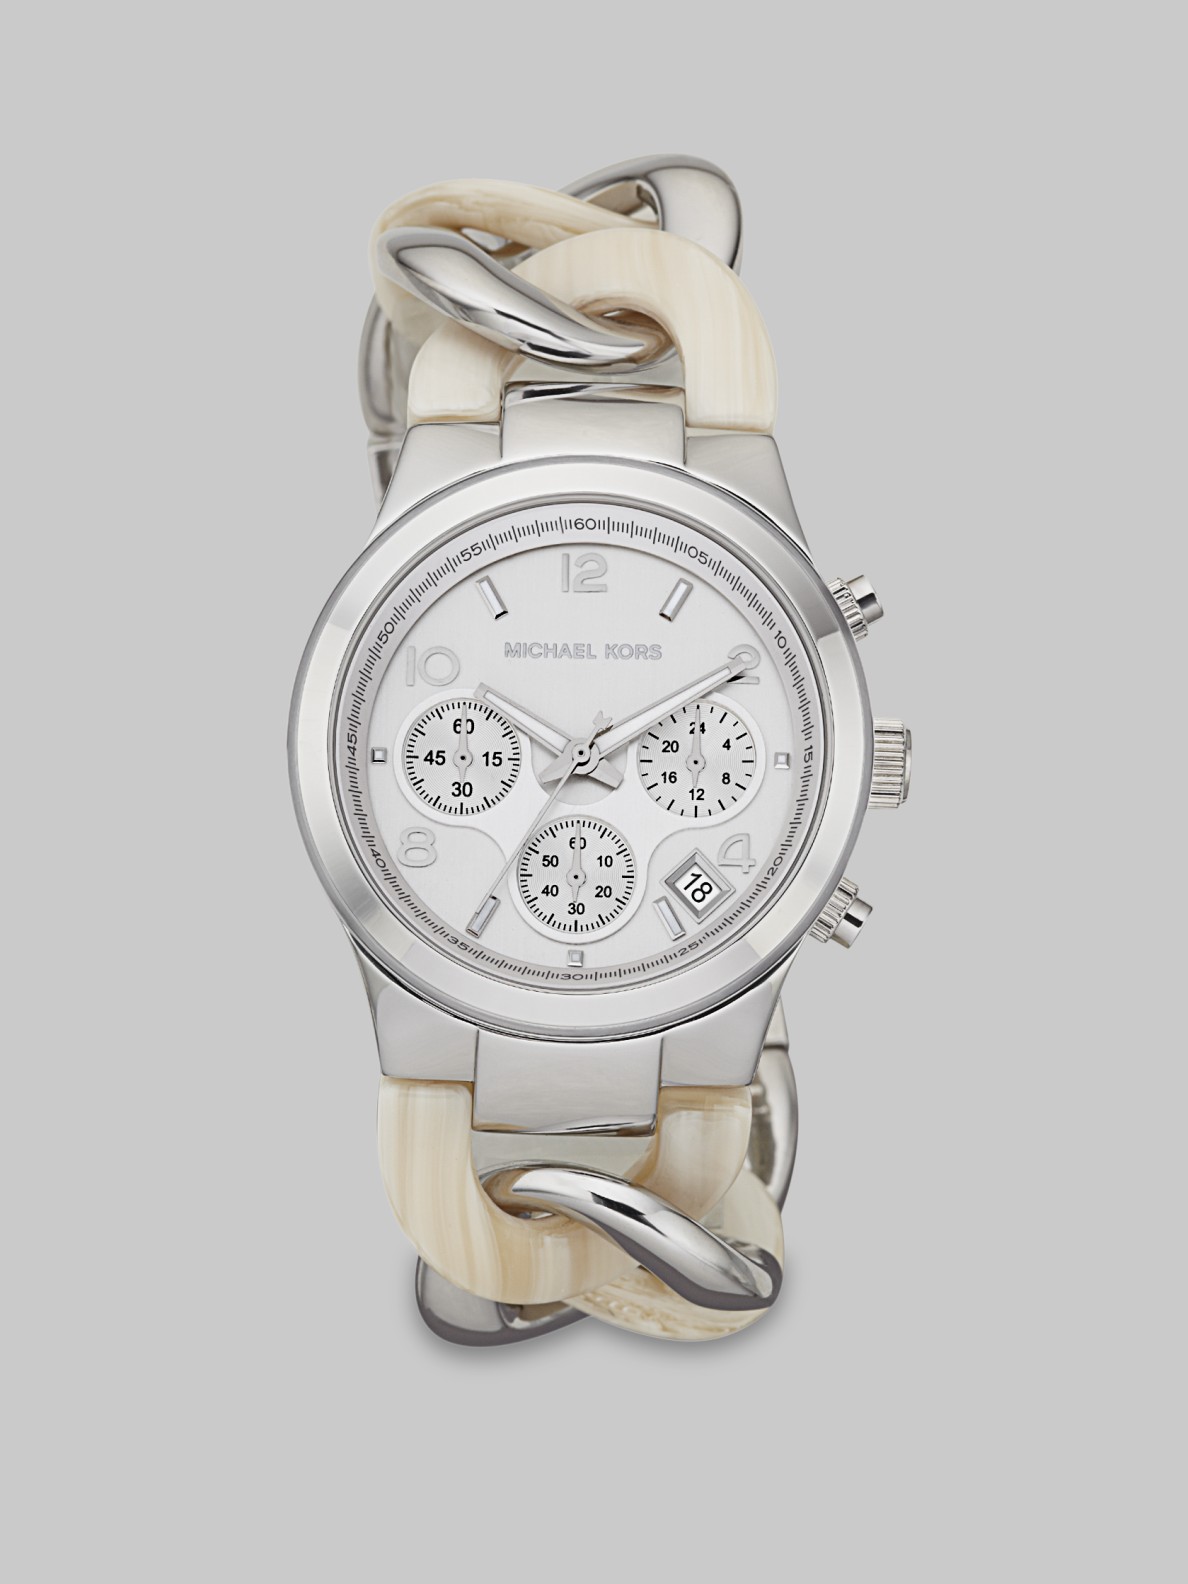 Lyst - Michael kors Acetate Stainless Steel Chronograph Watch in Metallic